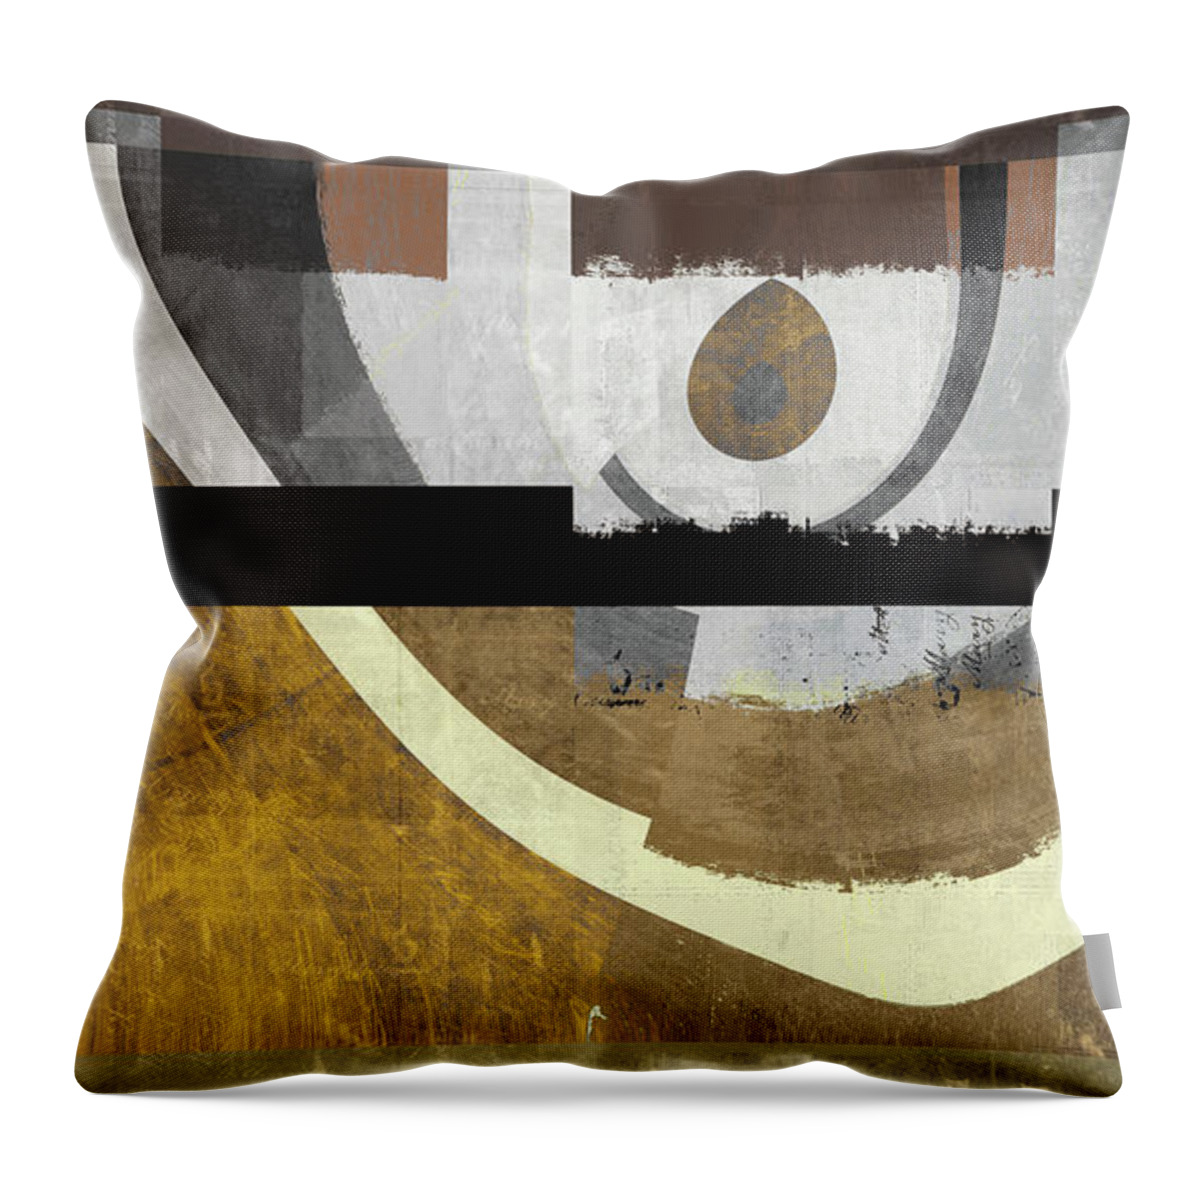 Brown Throw Pillow featuring the digital art Cozmoz - c69 by Variance Collections